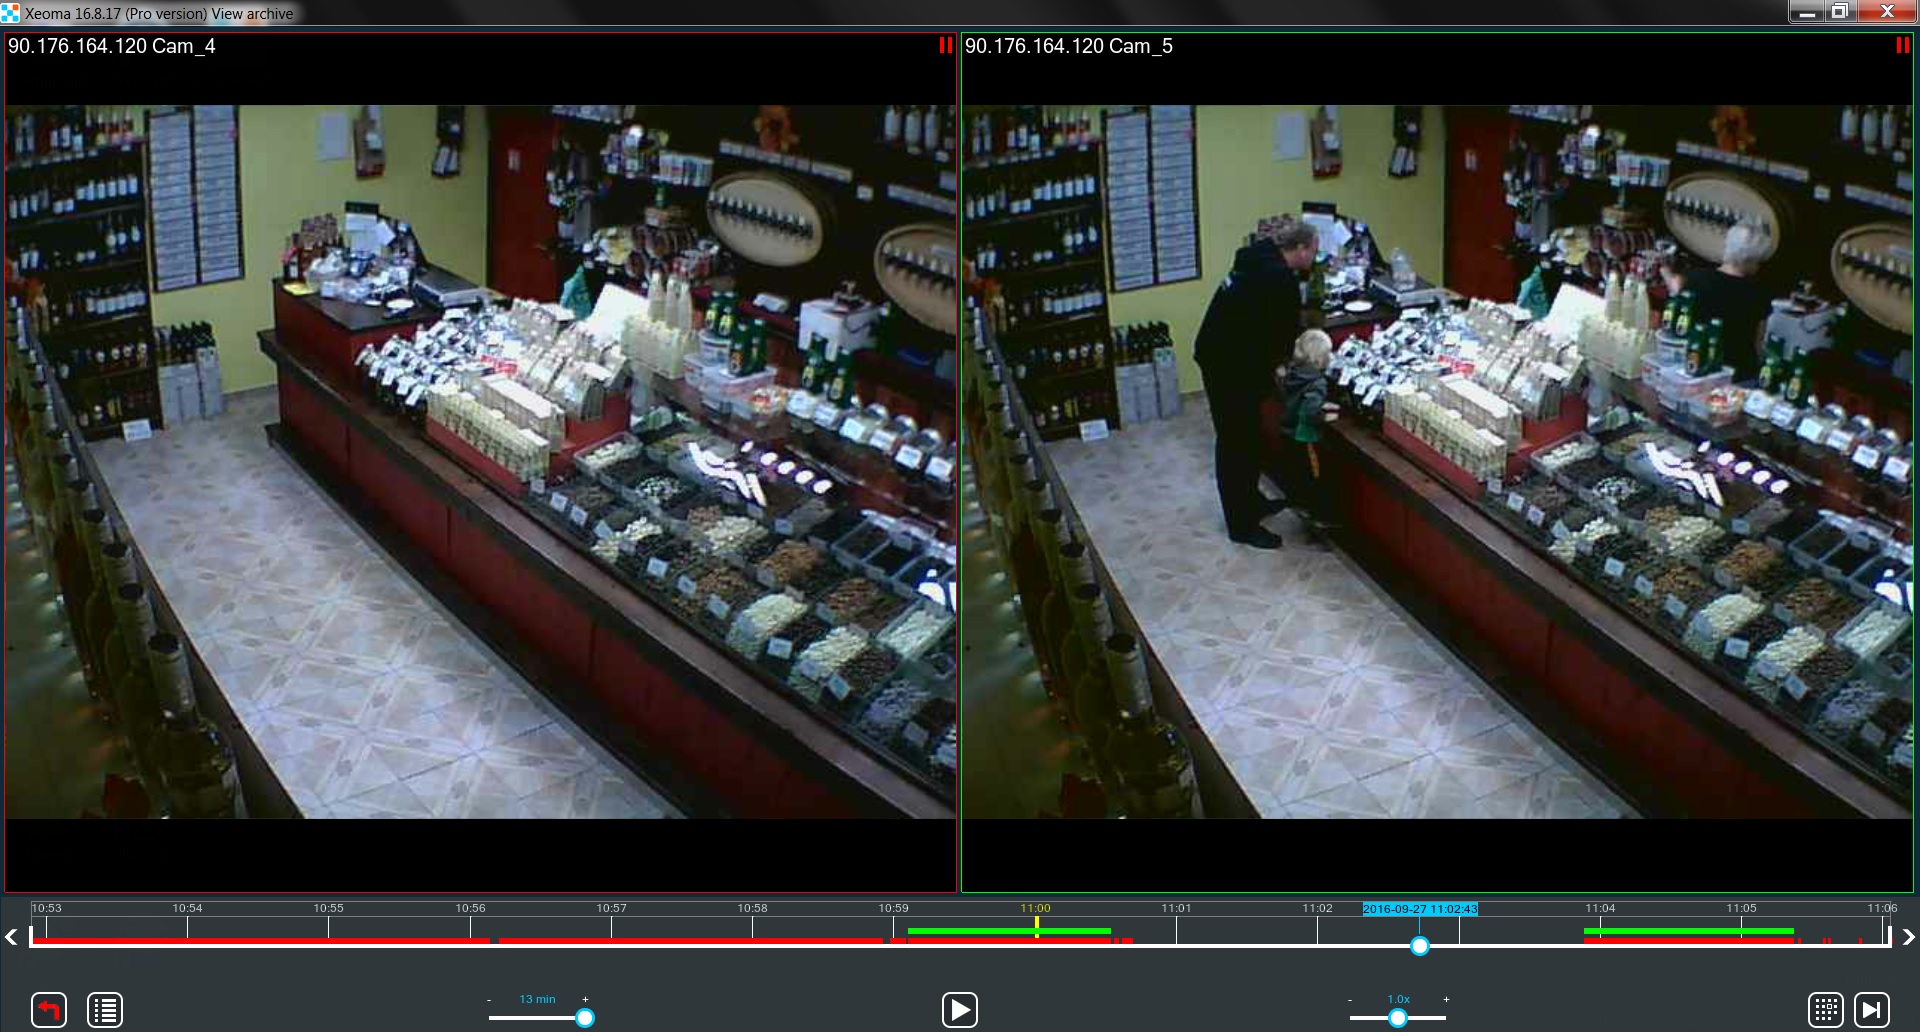 Working with the archive for house cameras